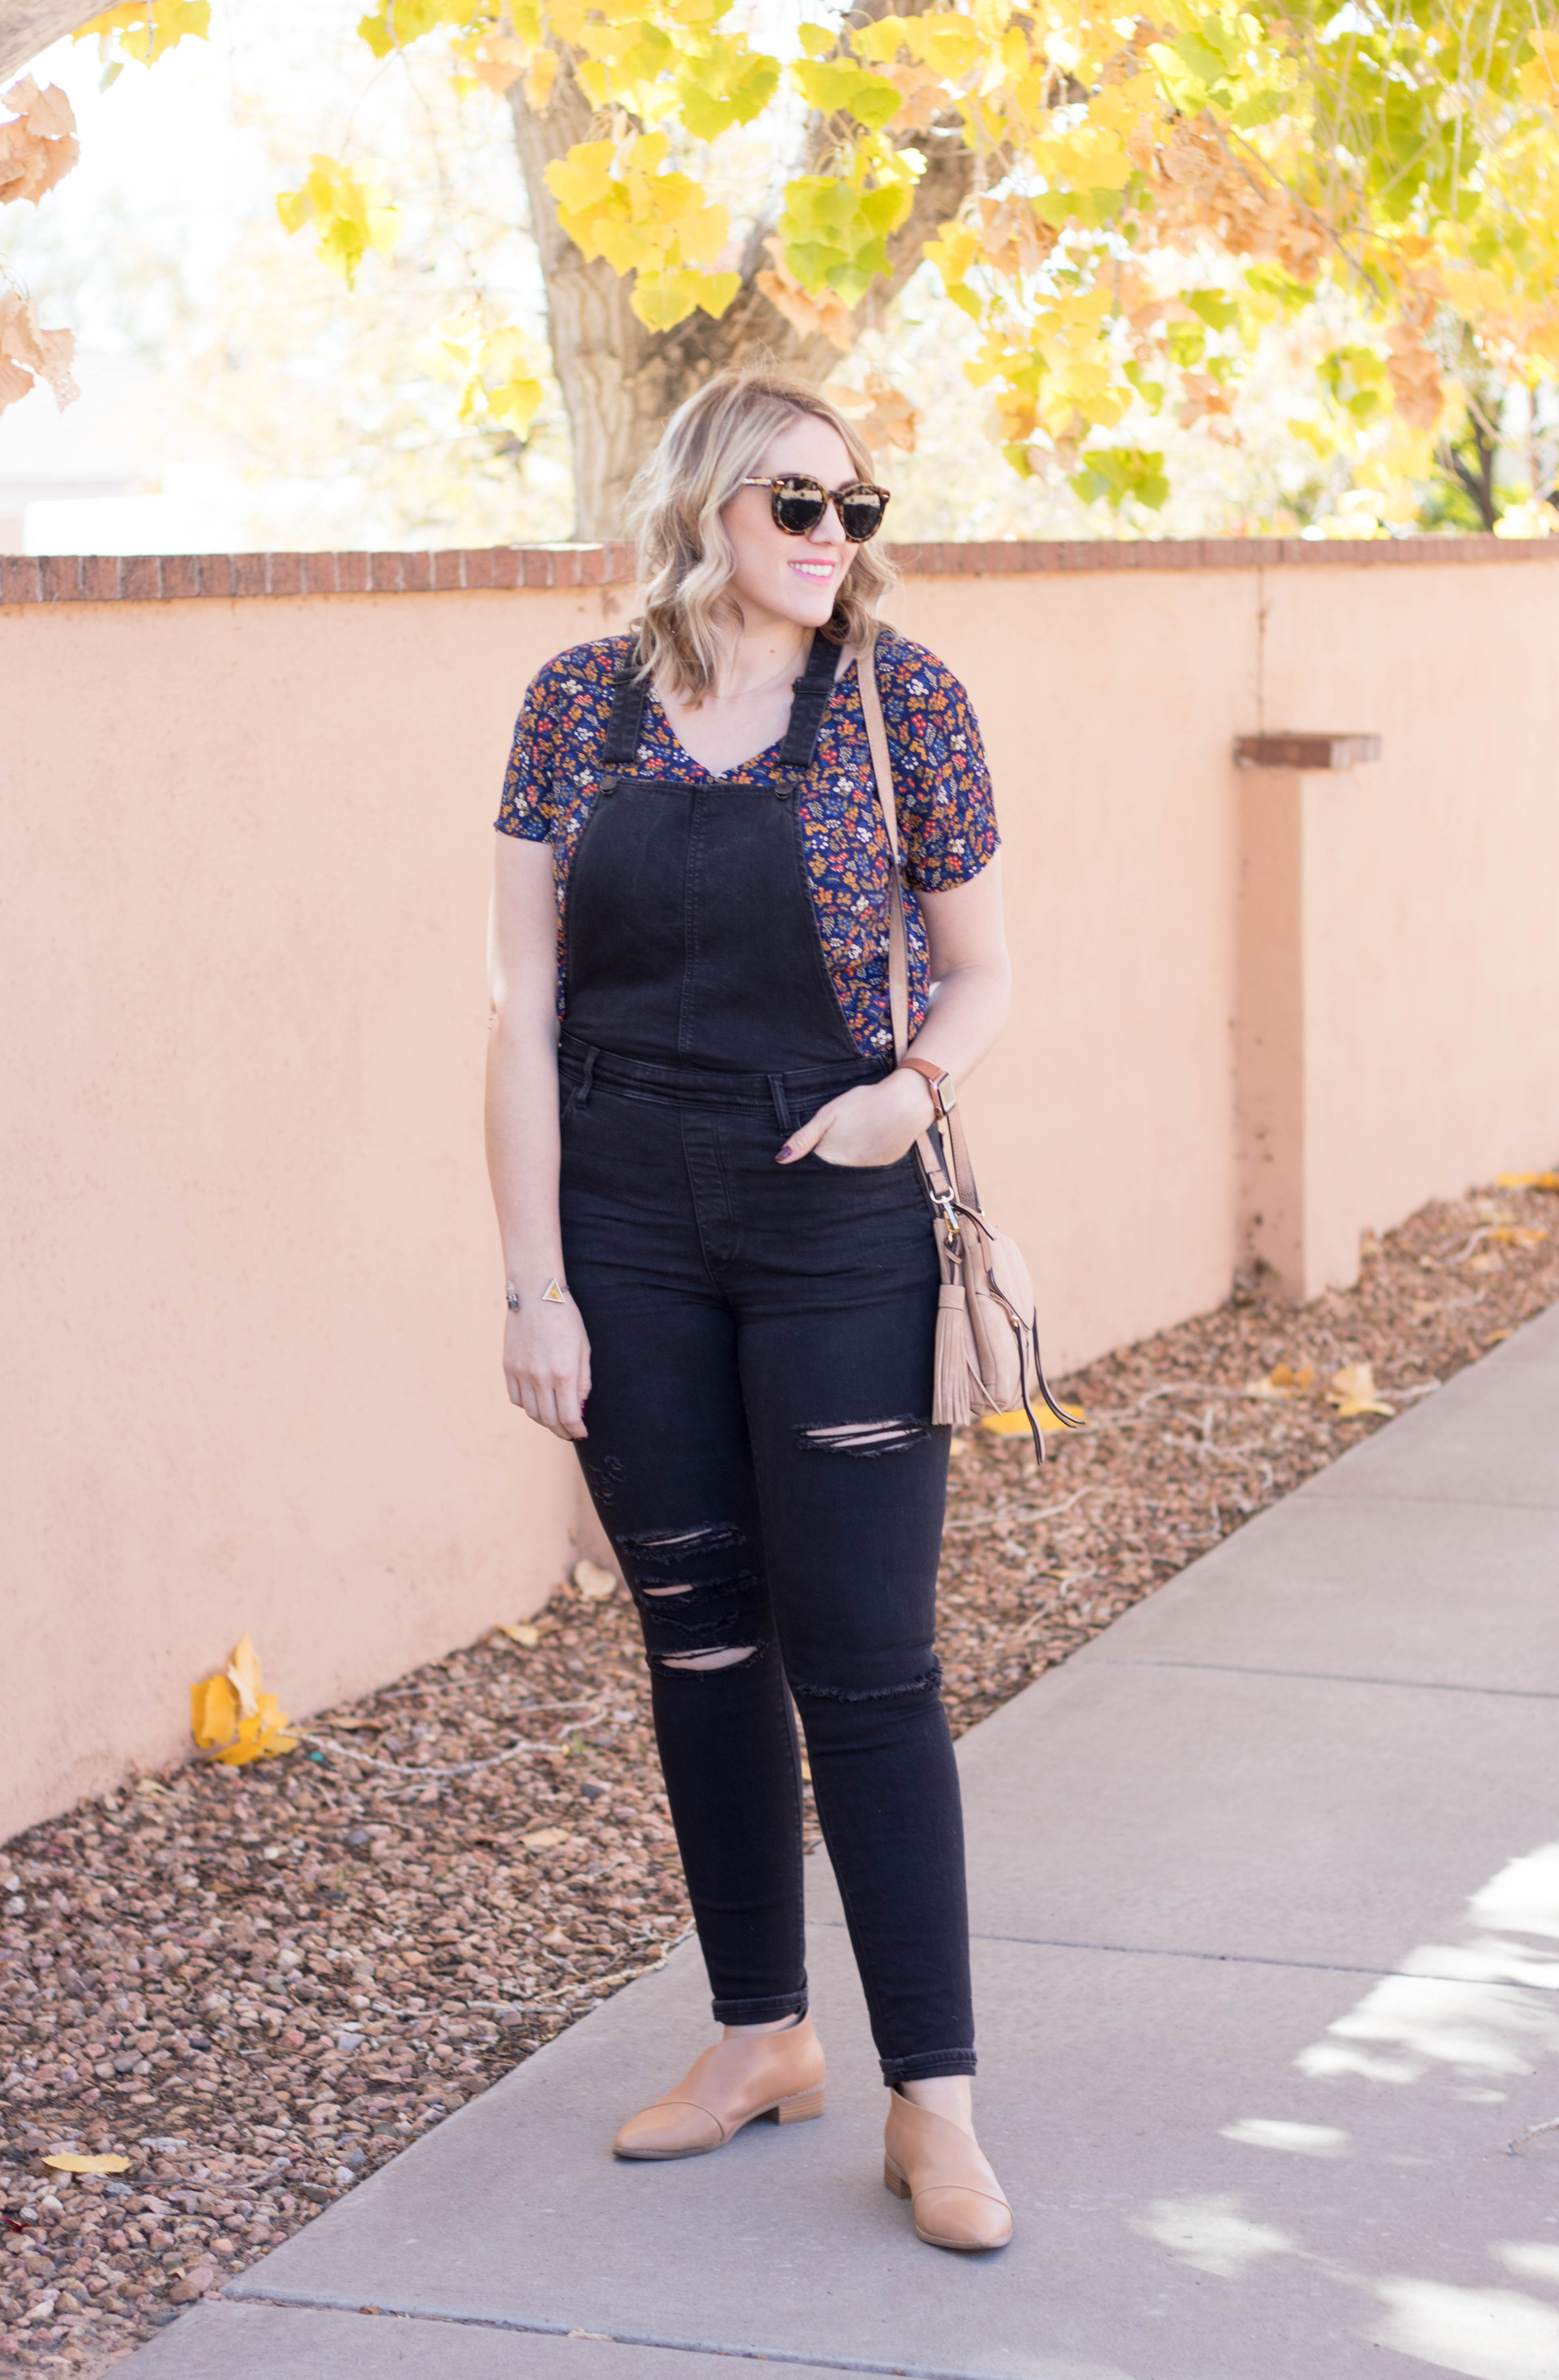 cute overalls outfit for fall #tallfashion #falloutfit #madewelloutfit